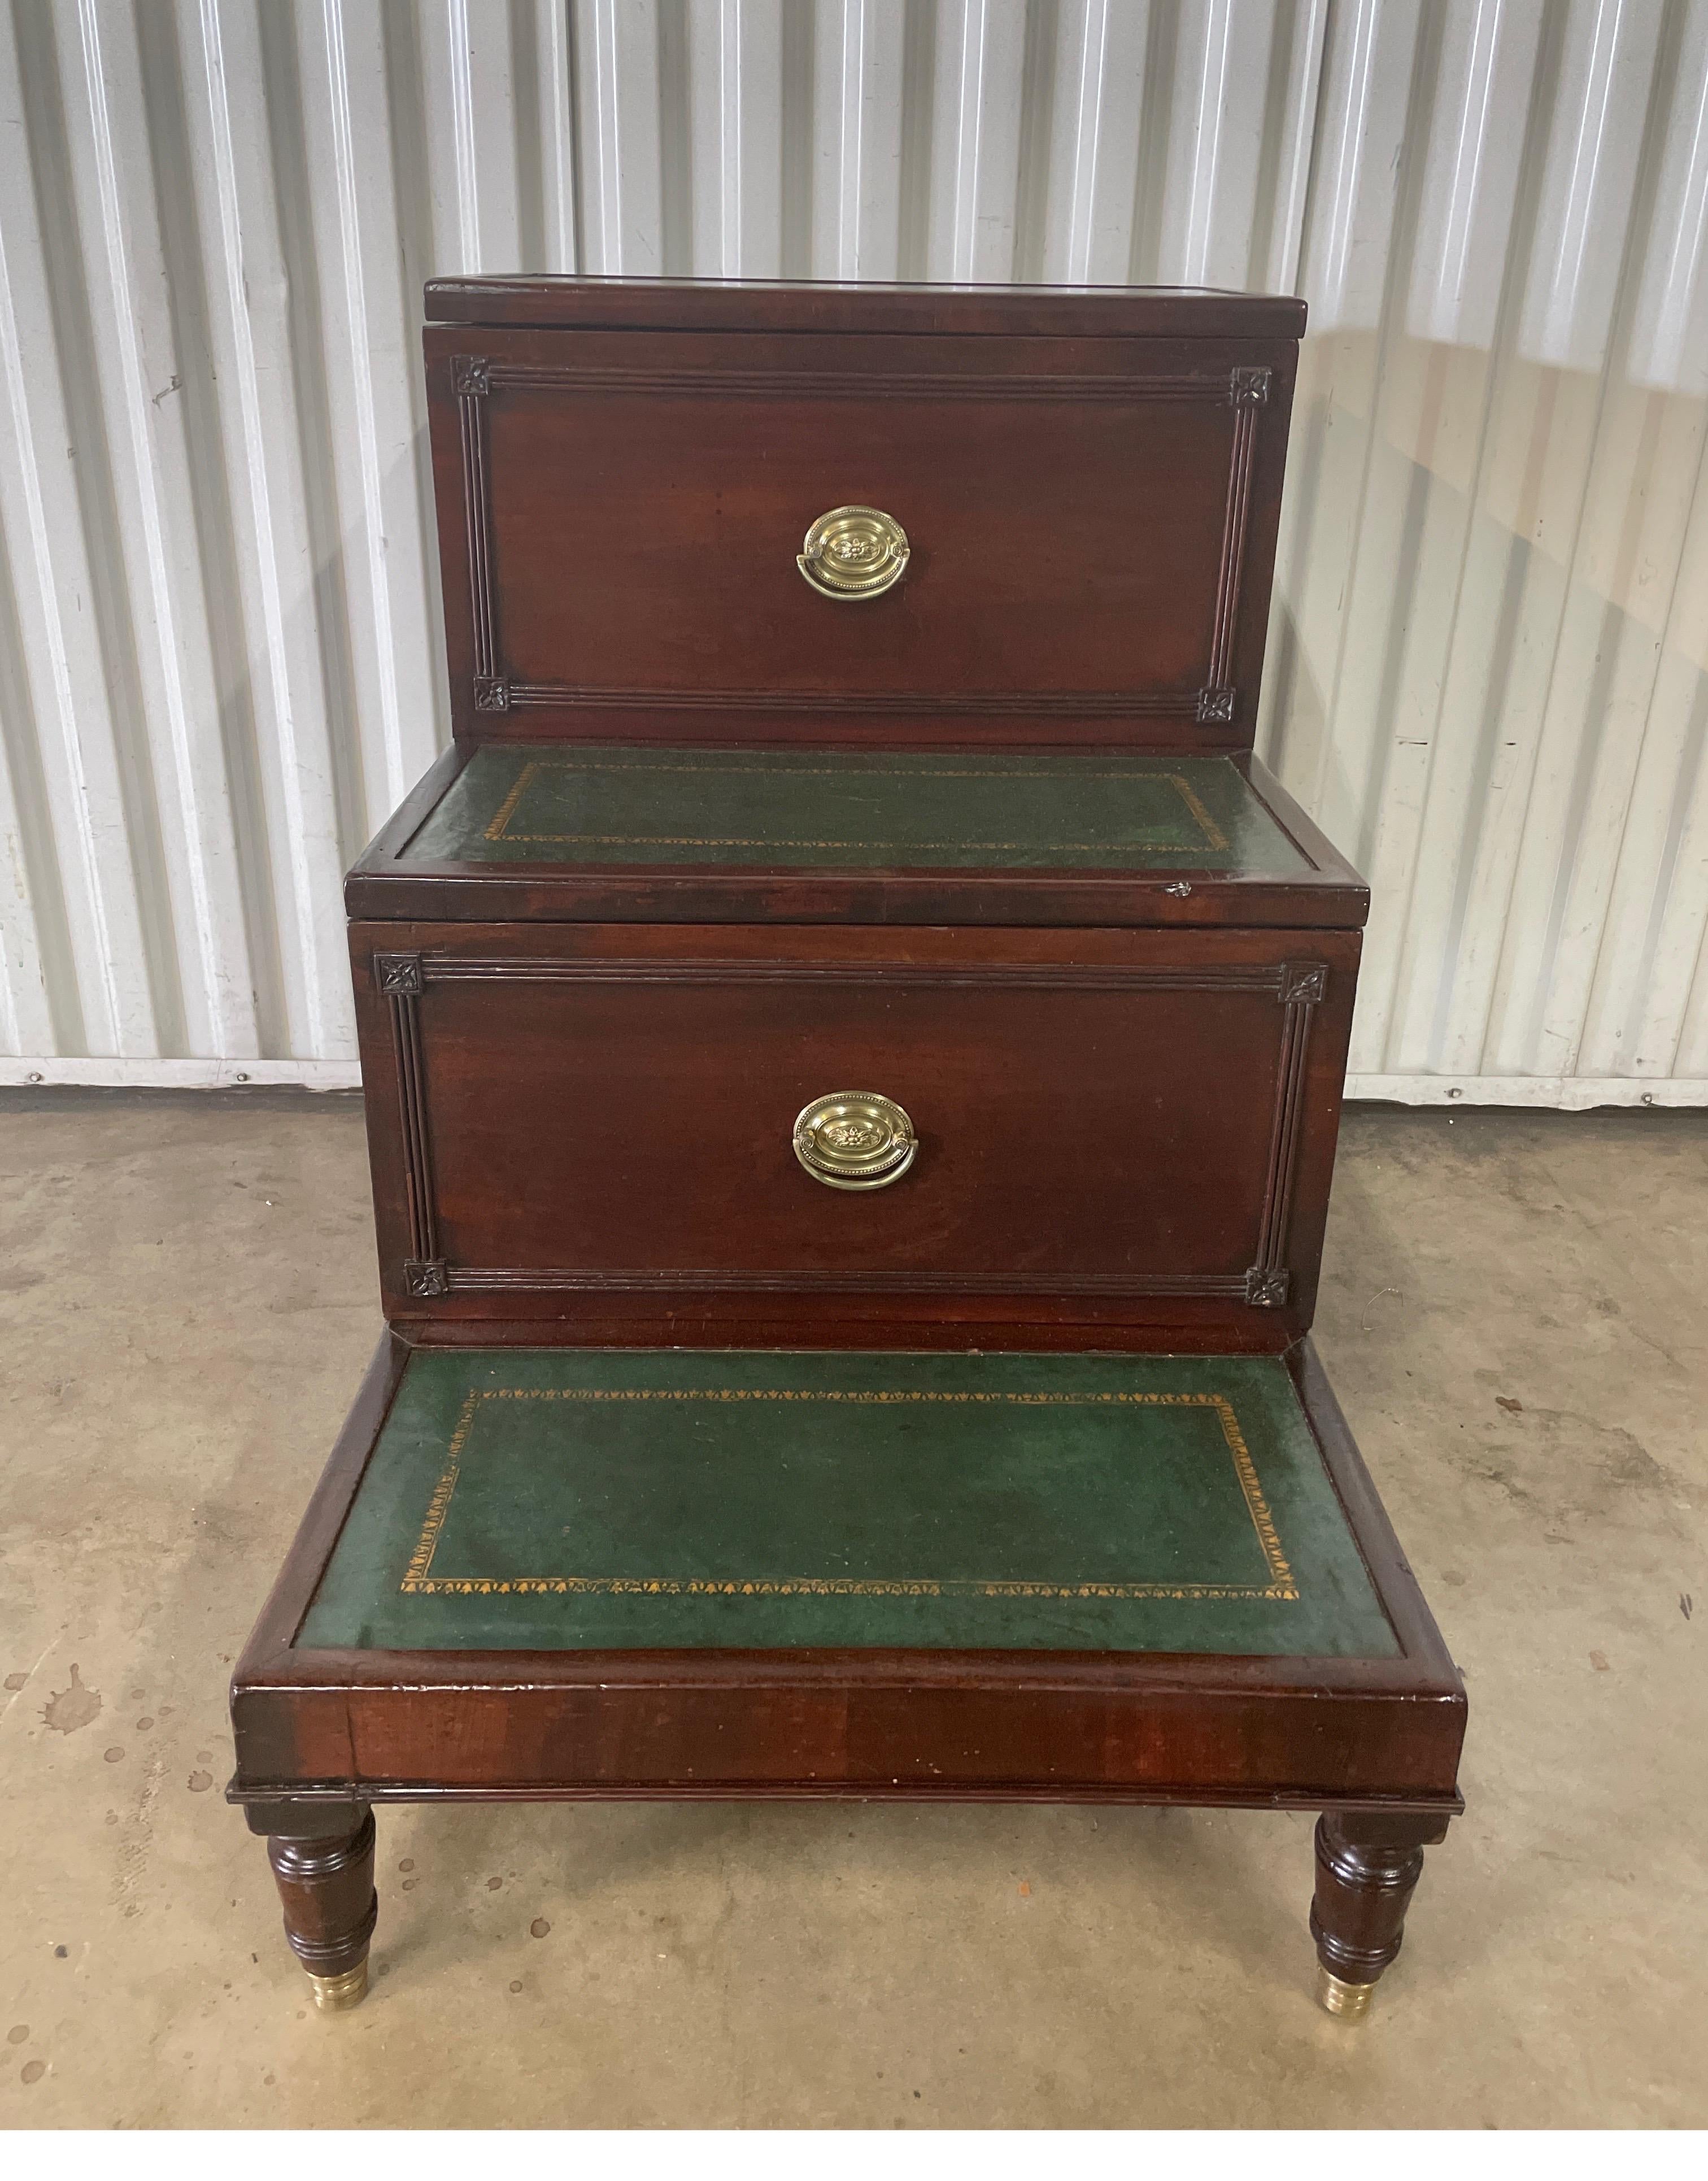 English 19th century library steps with tooled green leather steps. One drawer pulls out for storage & top step is hinged to lift up. Oval brass pulls complete this piece.